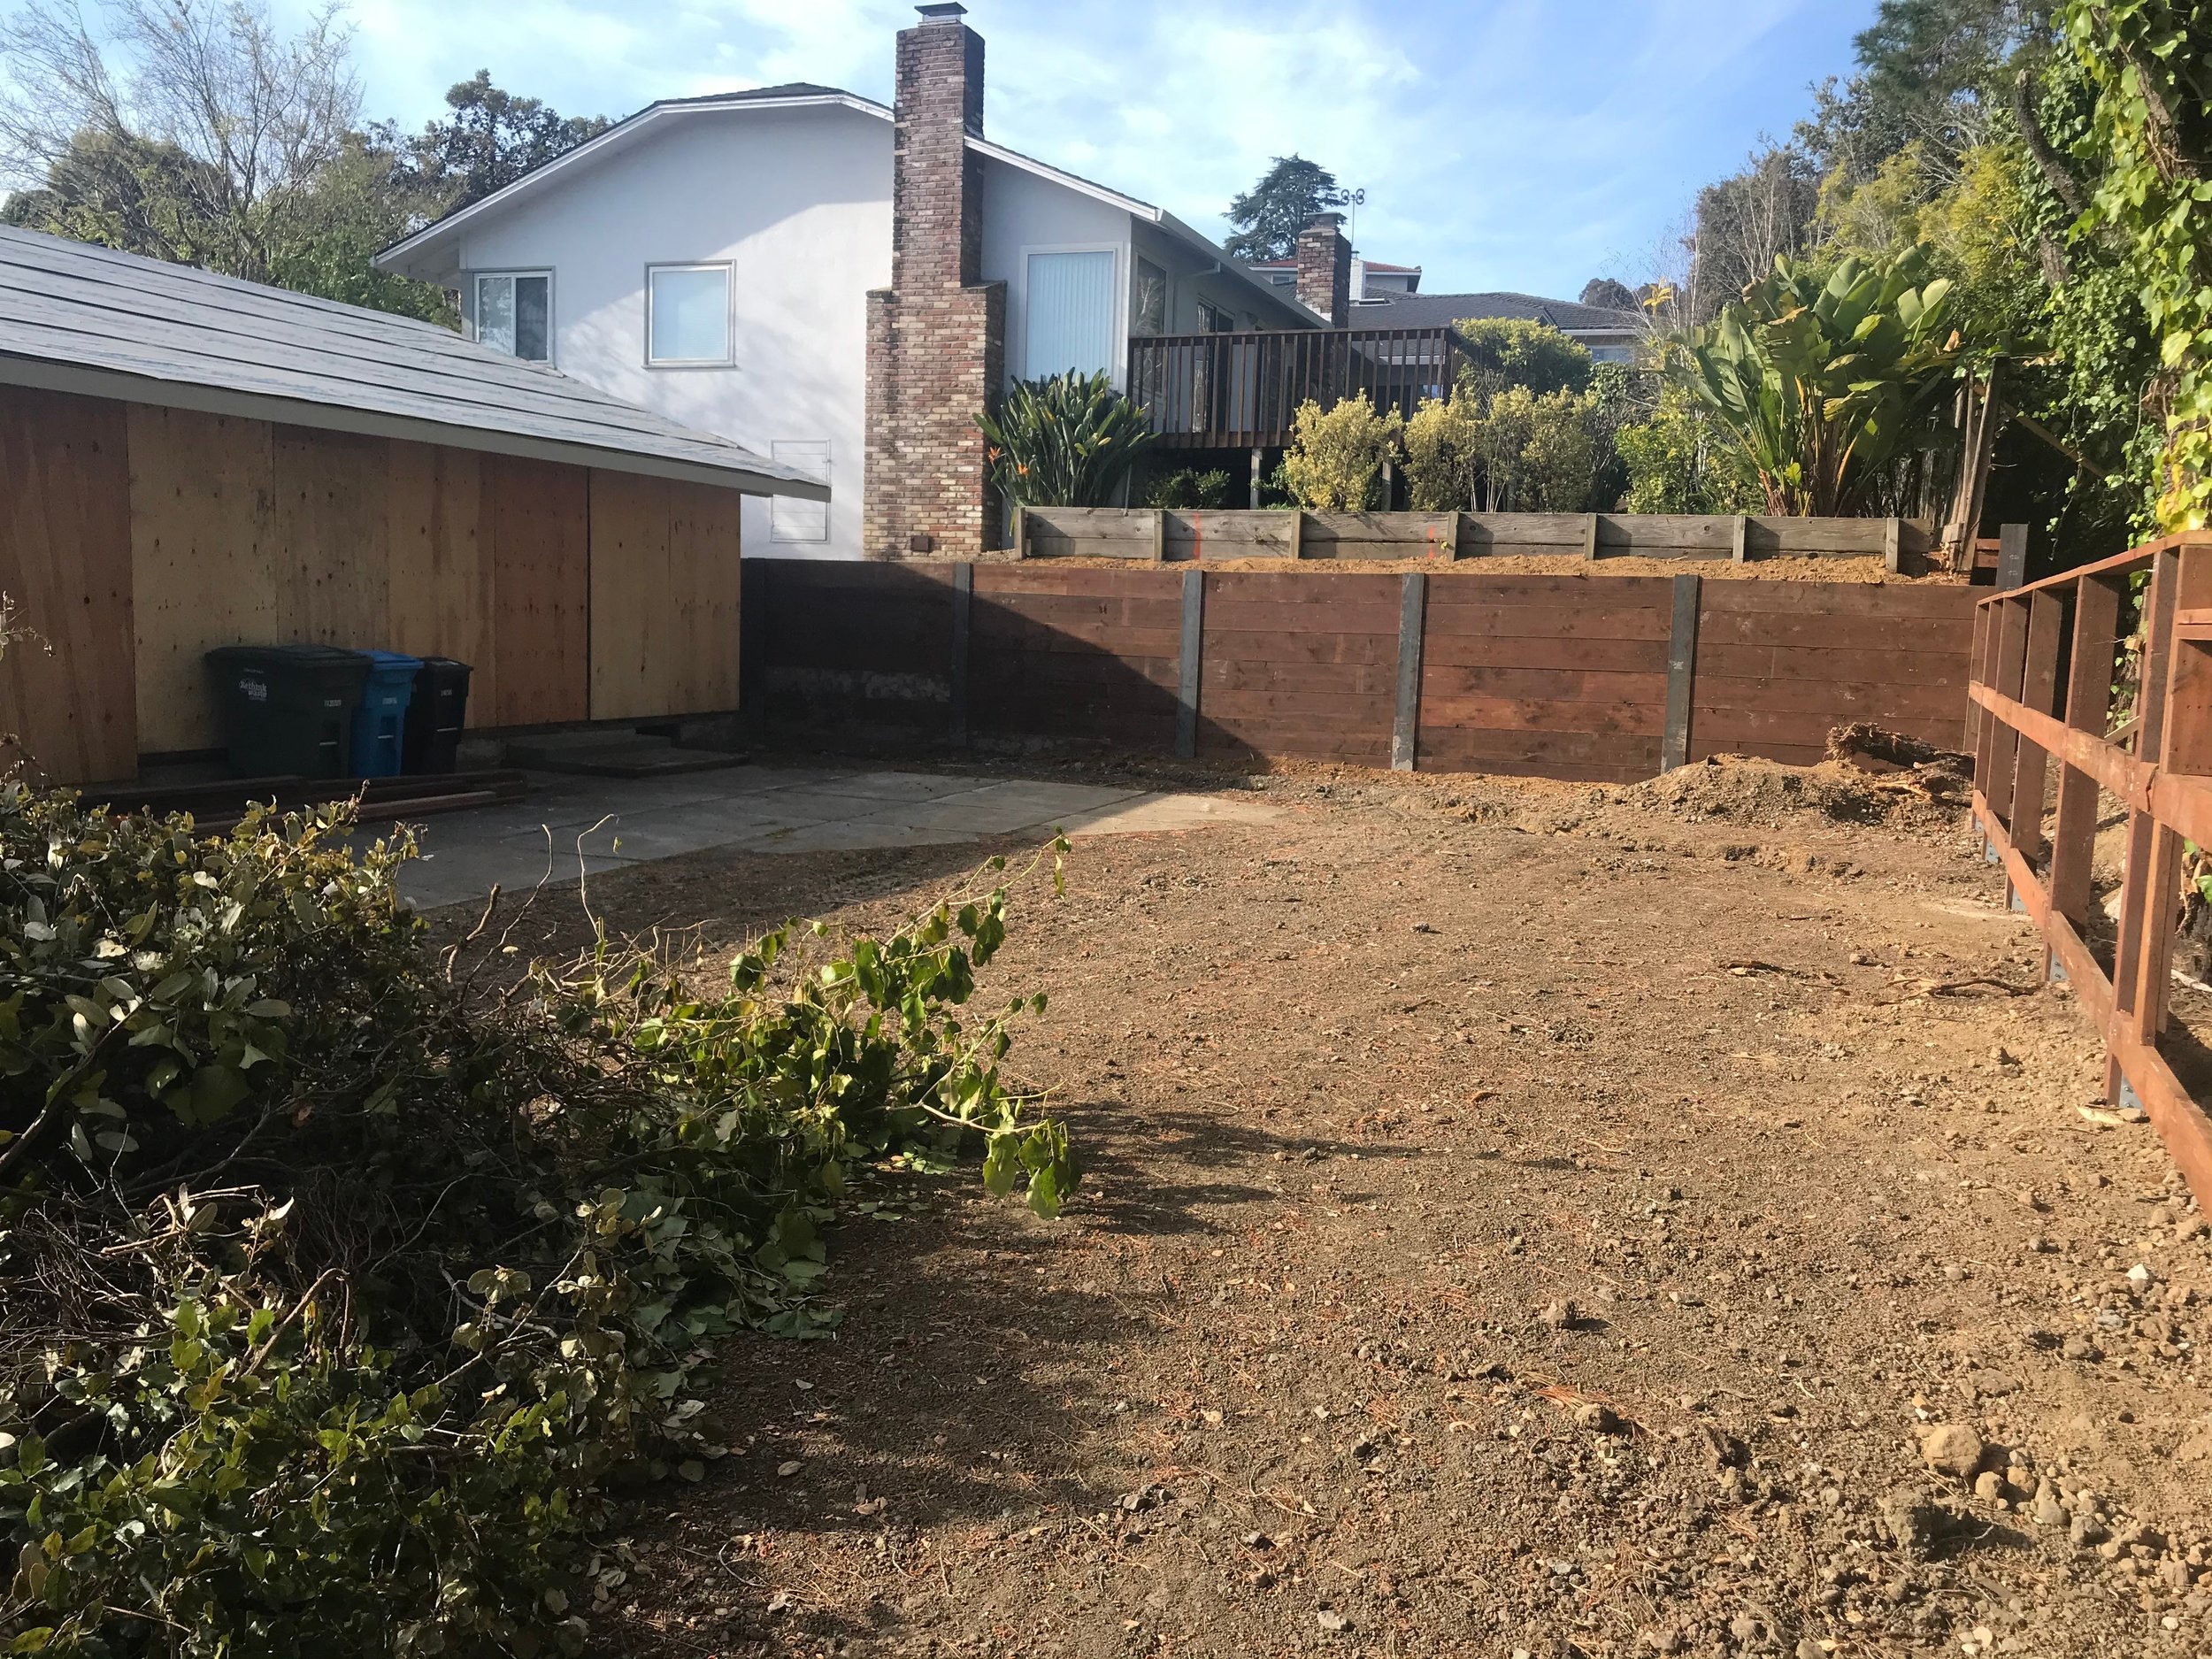 the backyard during renovation, just after a new retaining wall was put in to level the backyard